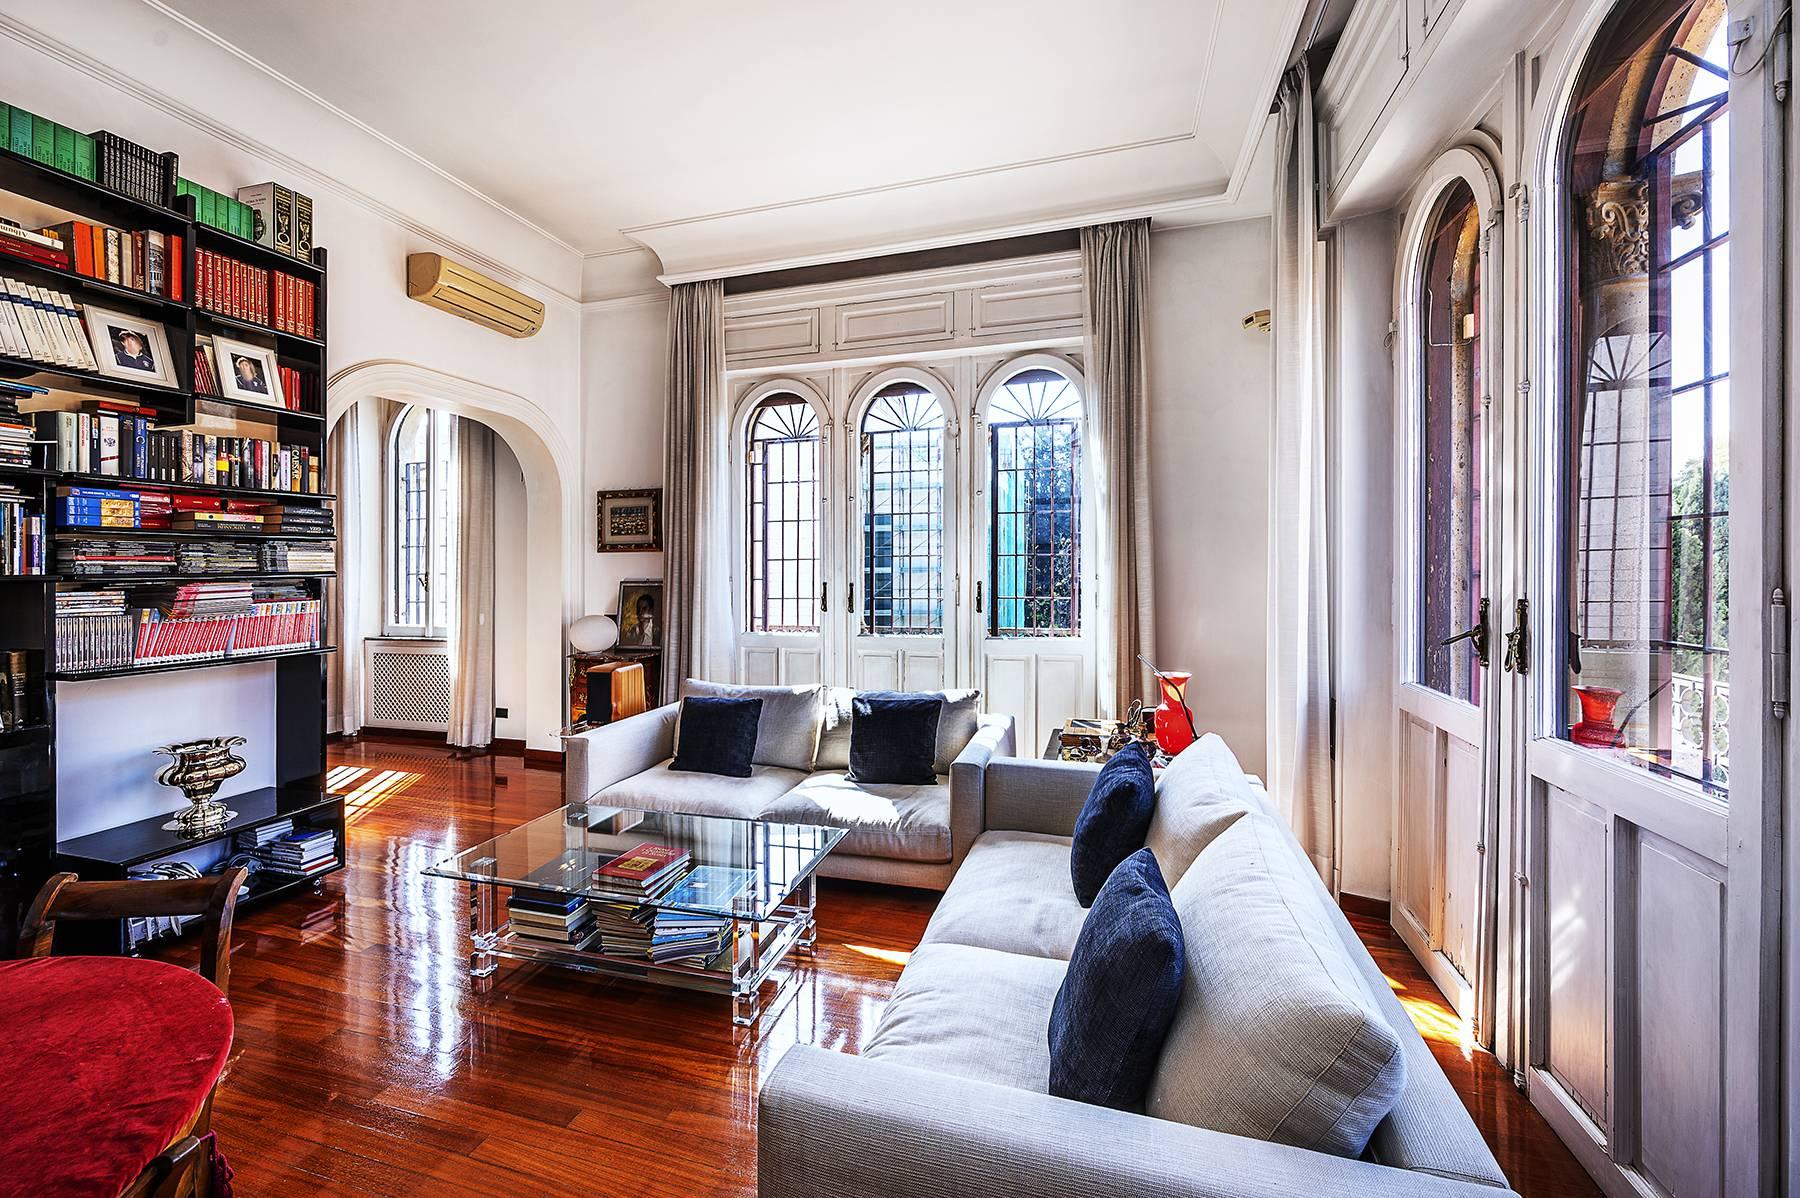 Superb penthouse located in an elegant Coppedè-style building - 9